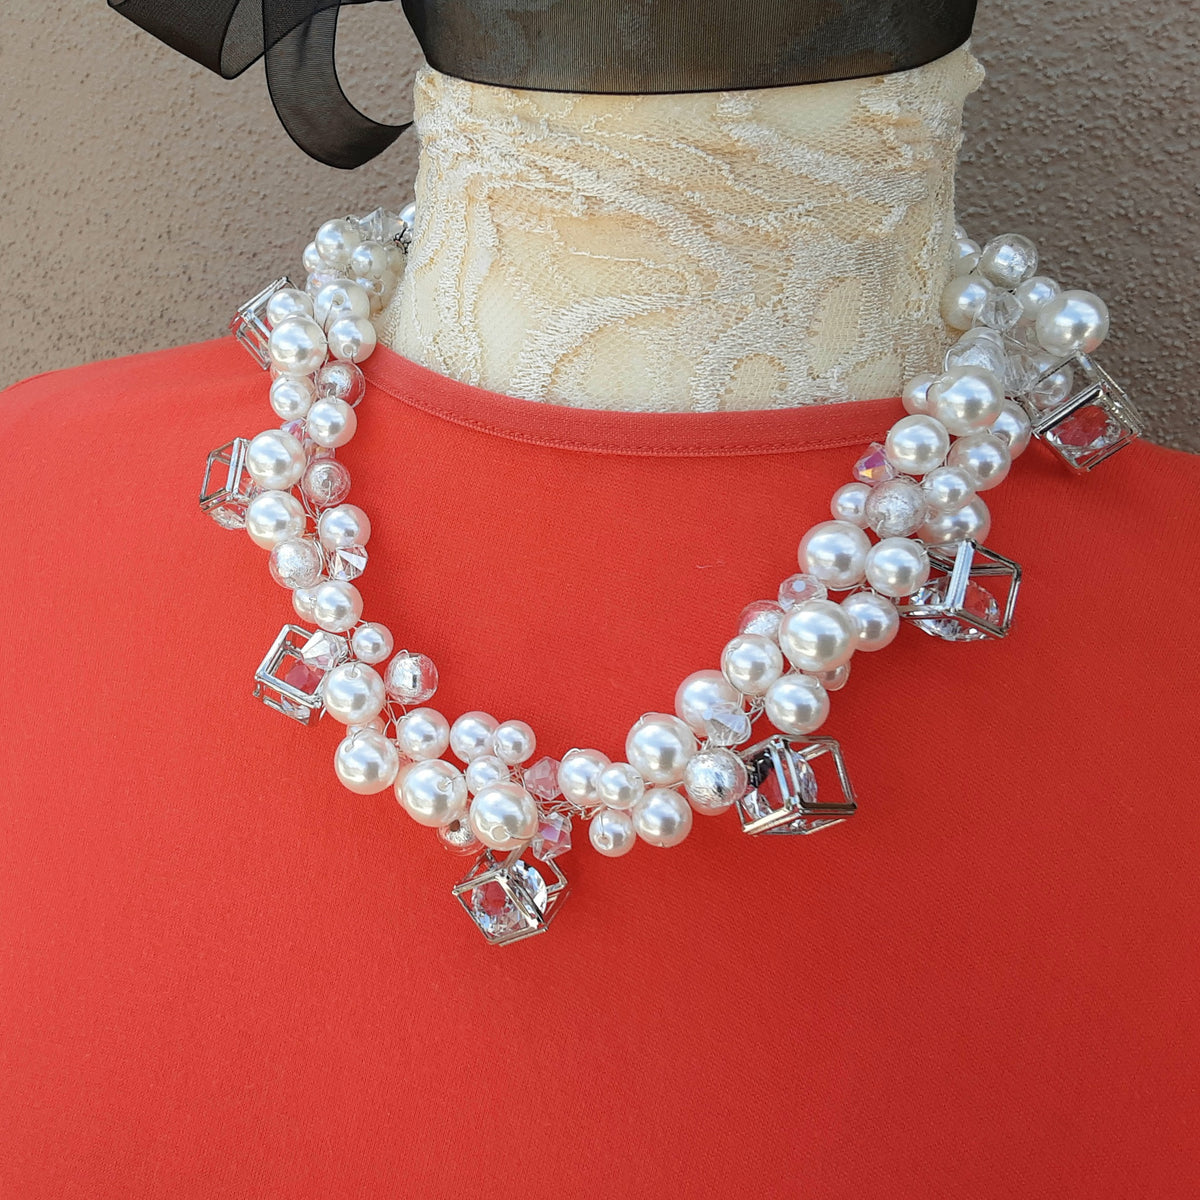 Unique Pearl Bridal Statement Necklace, Chunky Wedding Necklace, Crystal Gift for Her